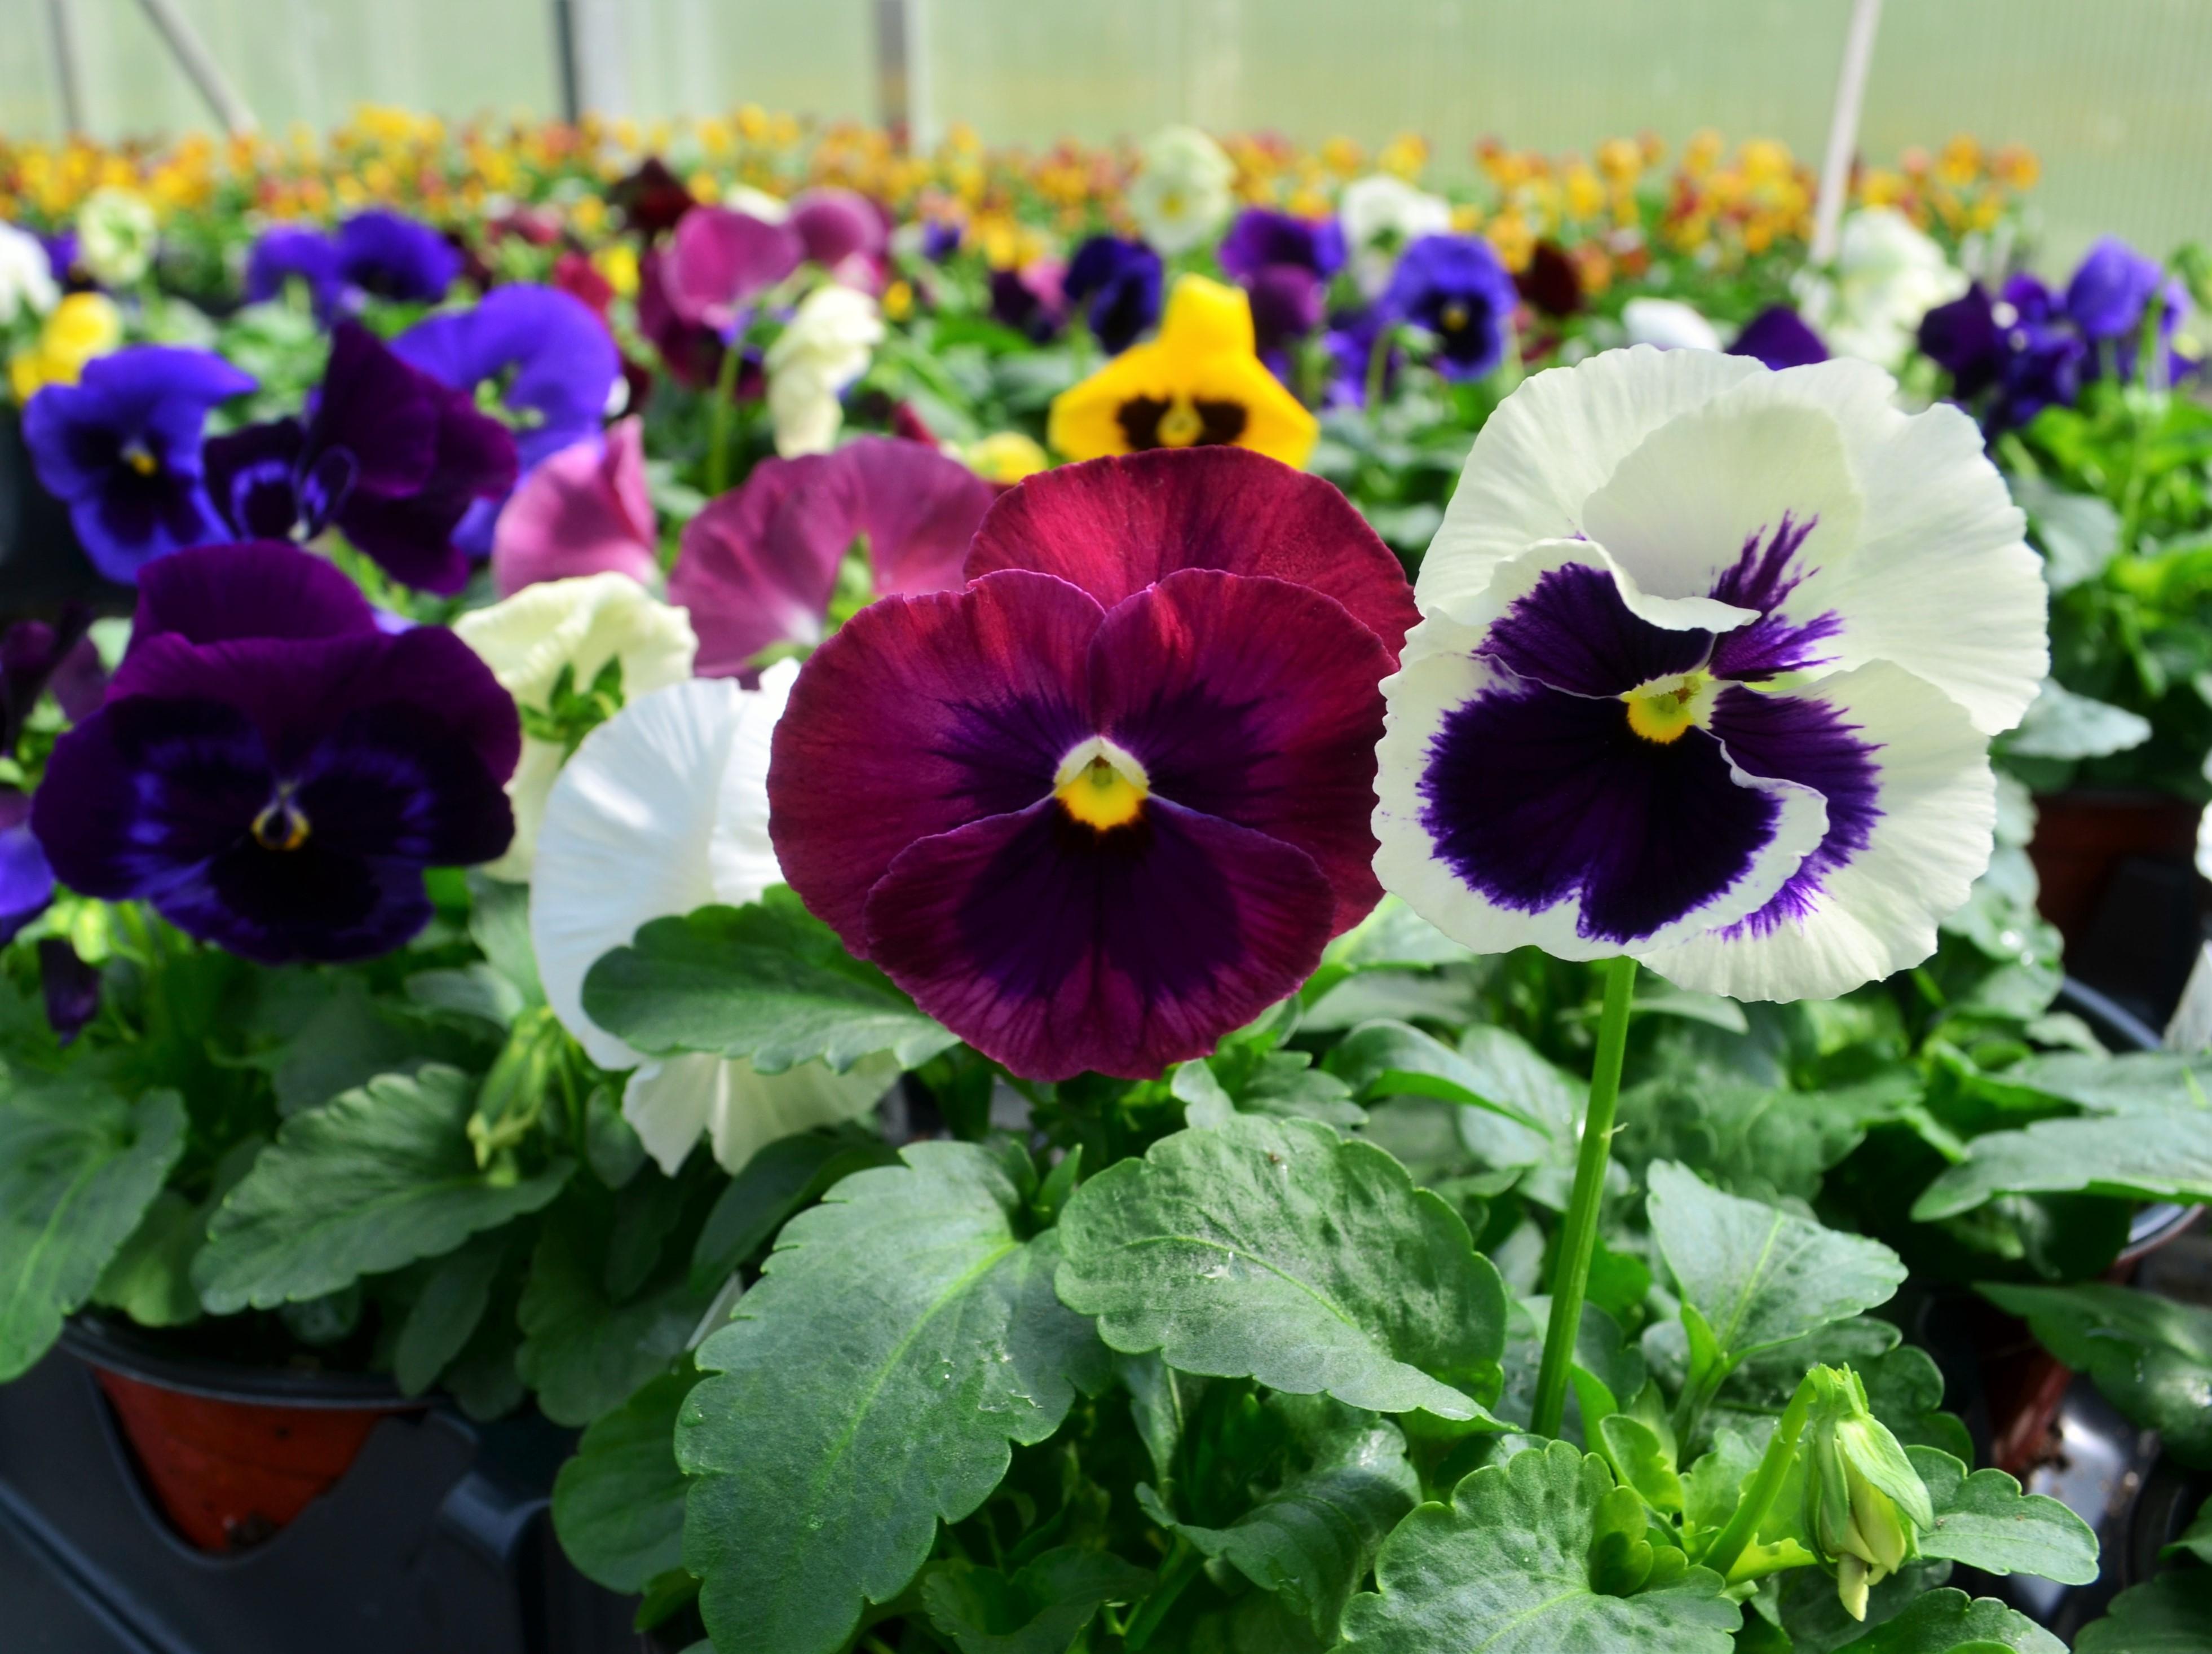 Viola wittrockiana Colossus 'Formula Mix' - Pansy from Hillcrest Nursery